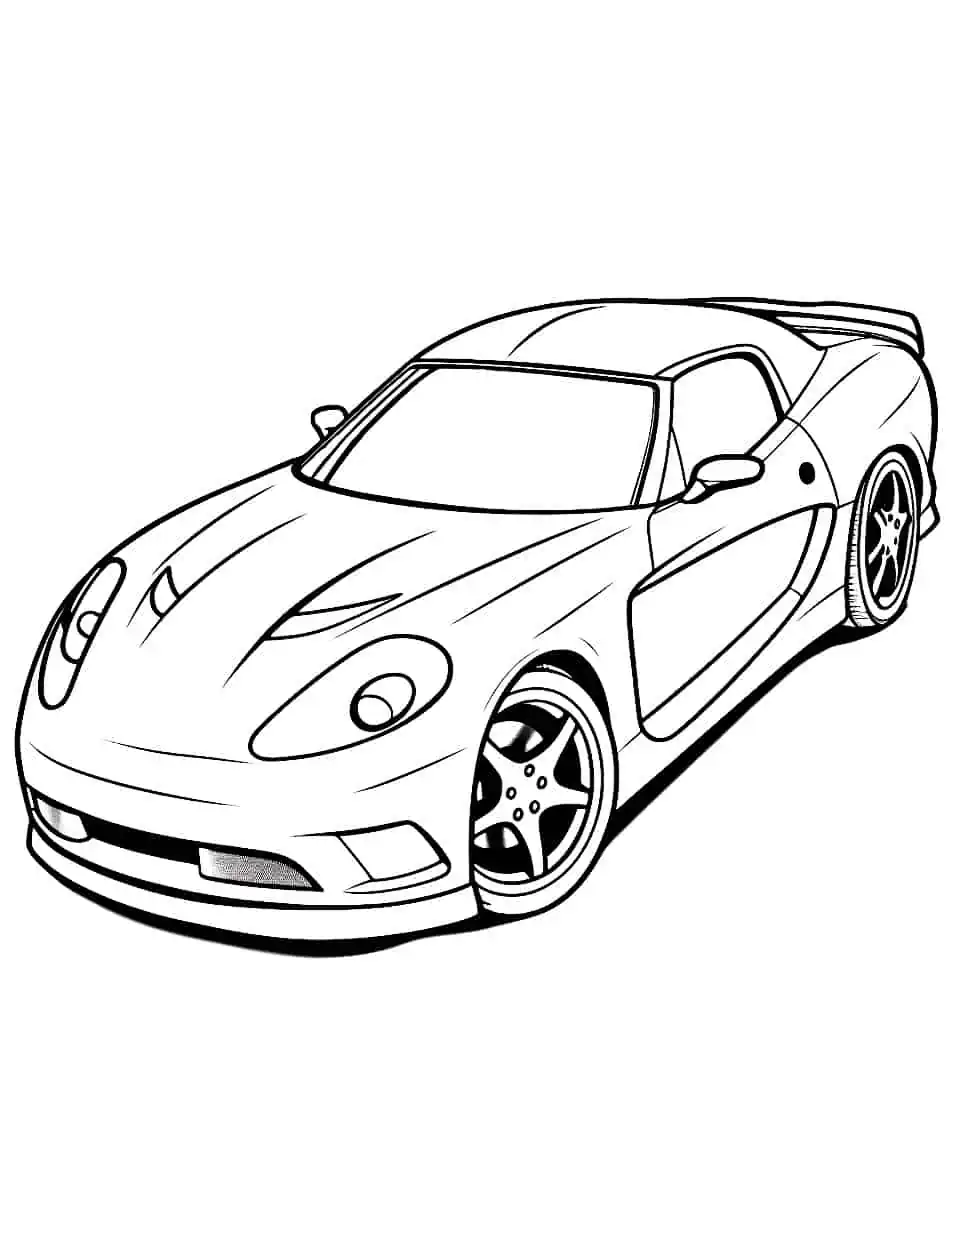 Super Sports Car Coloring Page - An image of a cool sports car waiting to be colored.